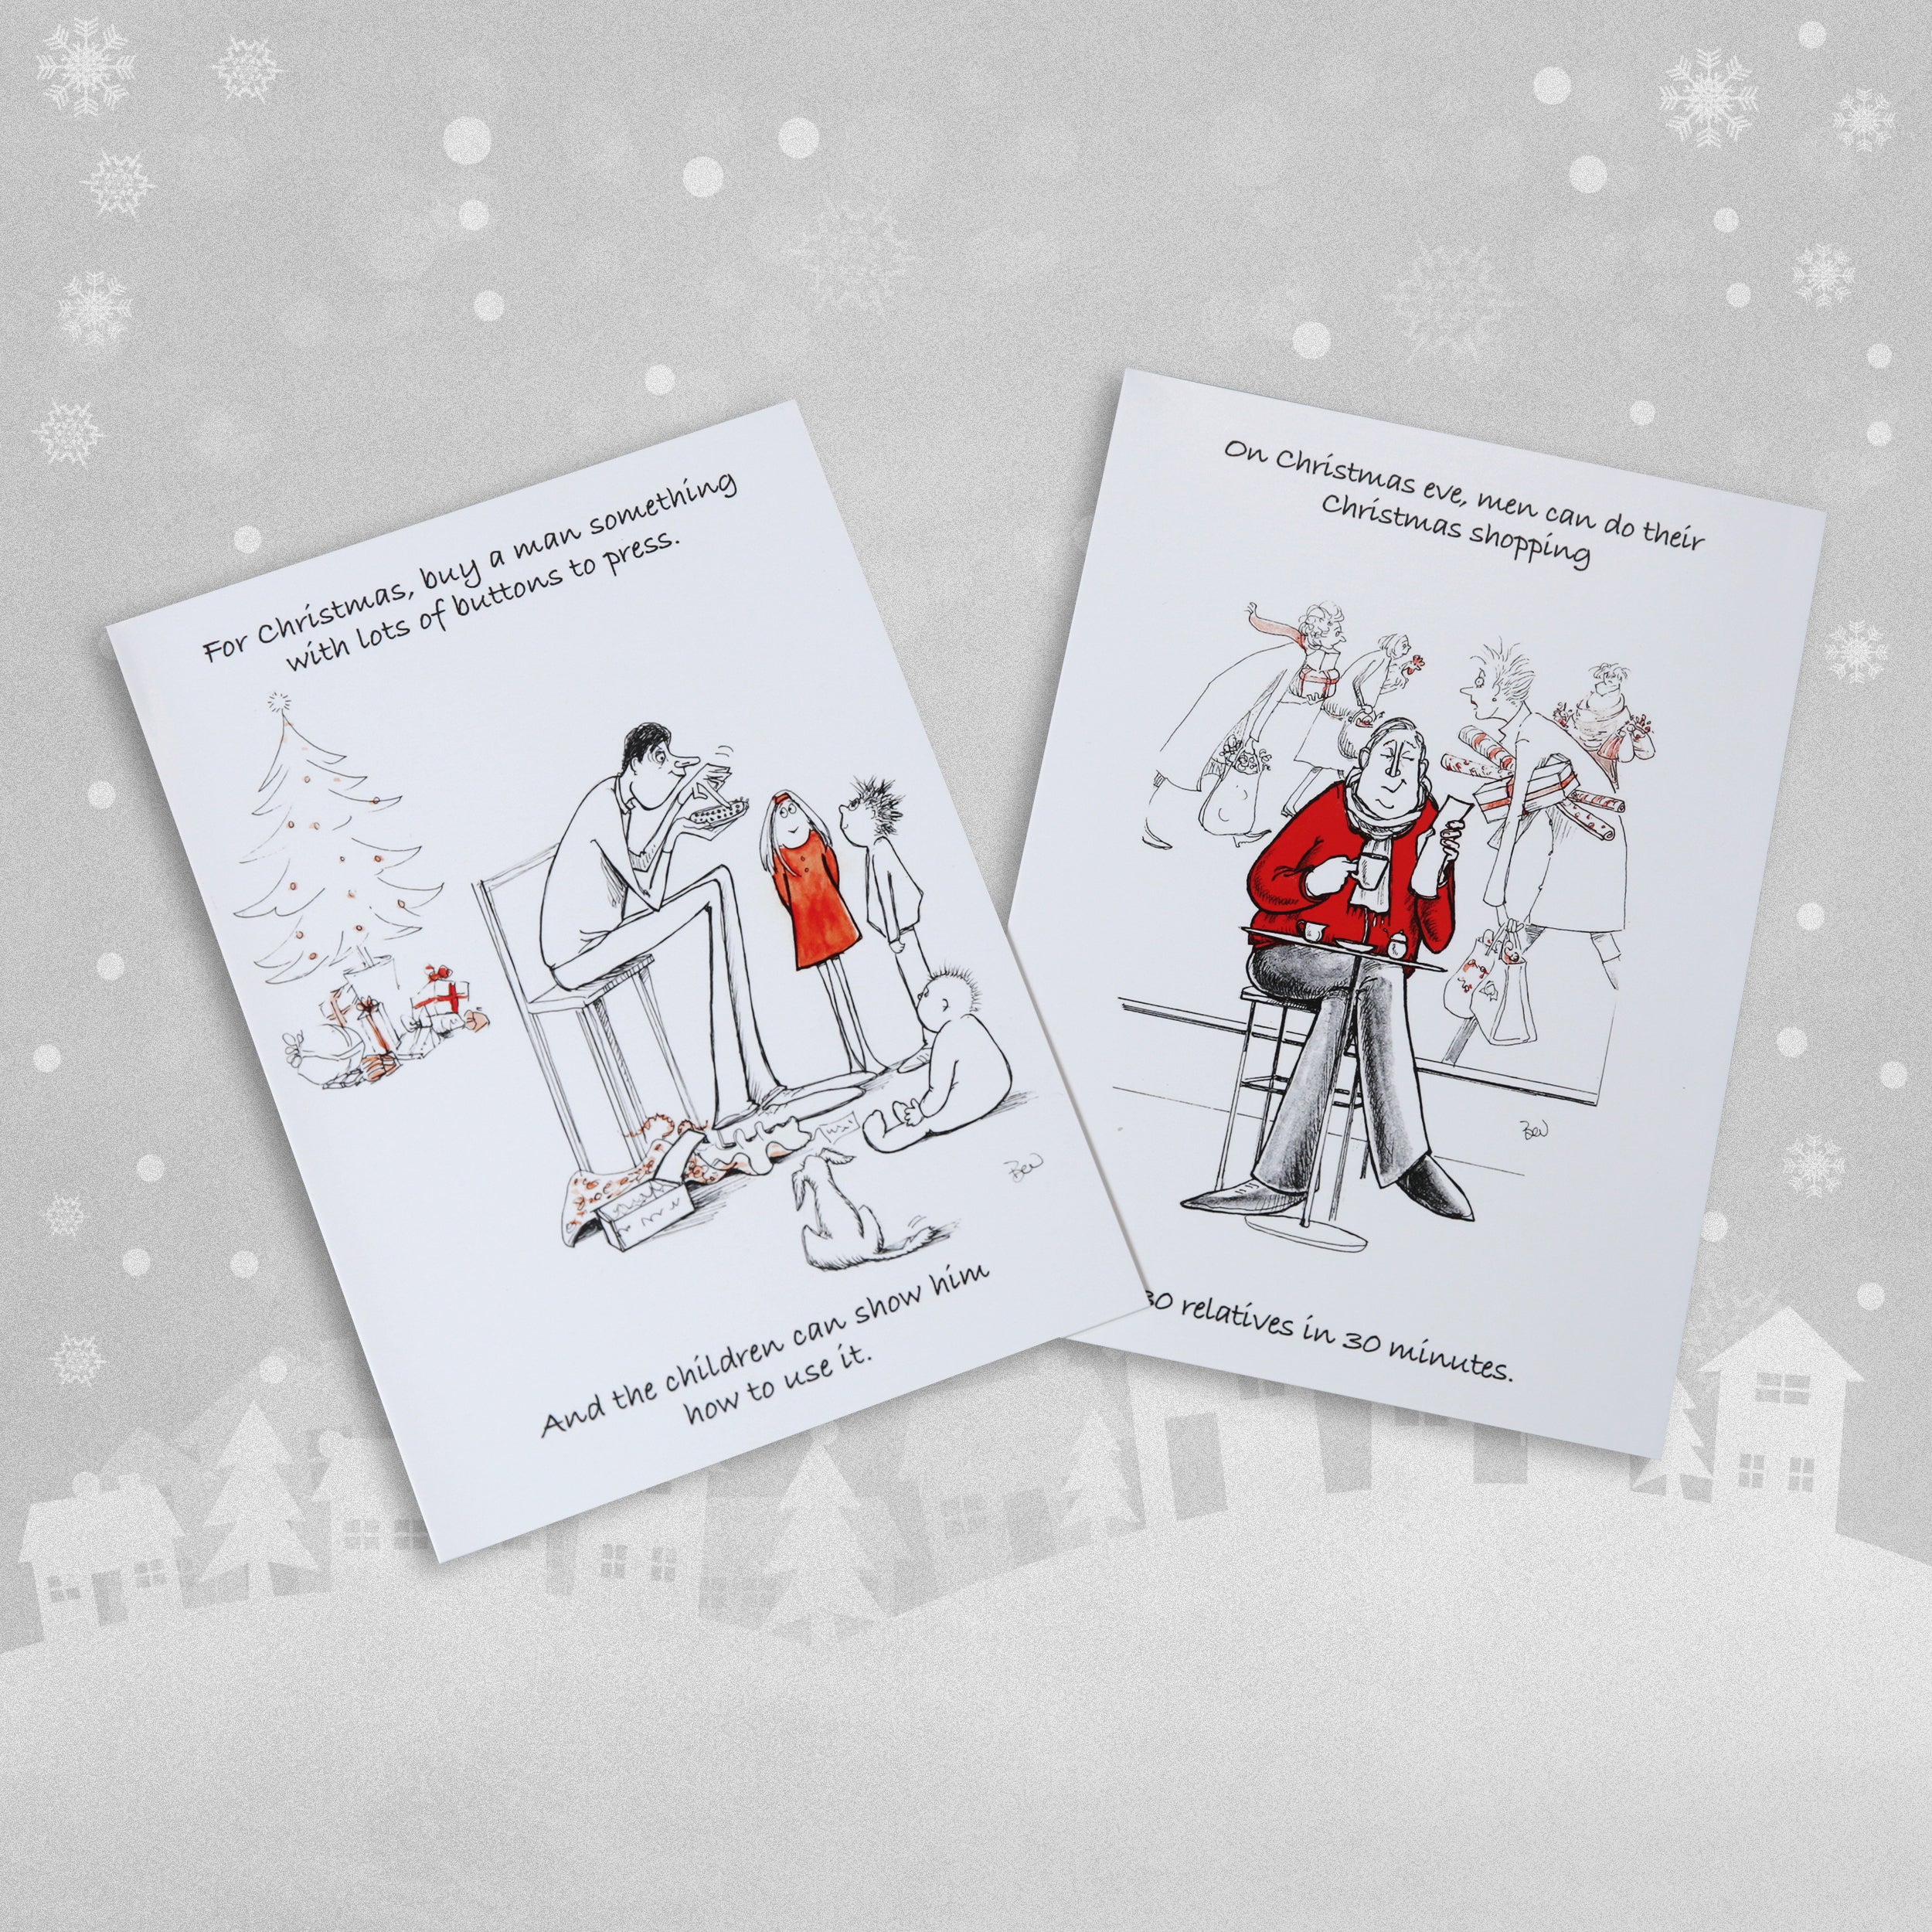 10 Humorous Christmas Cards - '30' and 'Children'